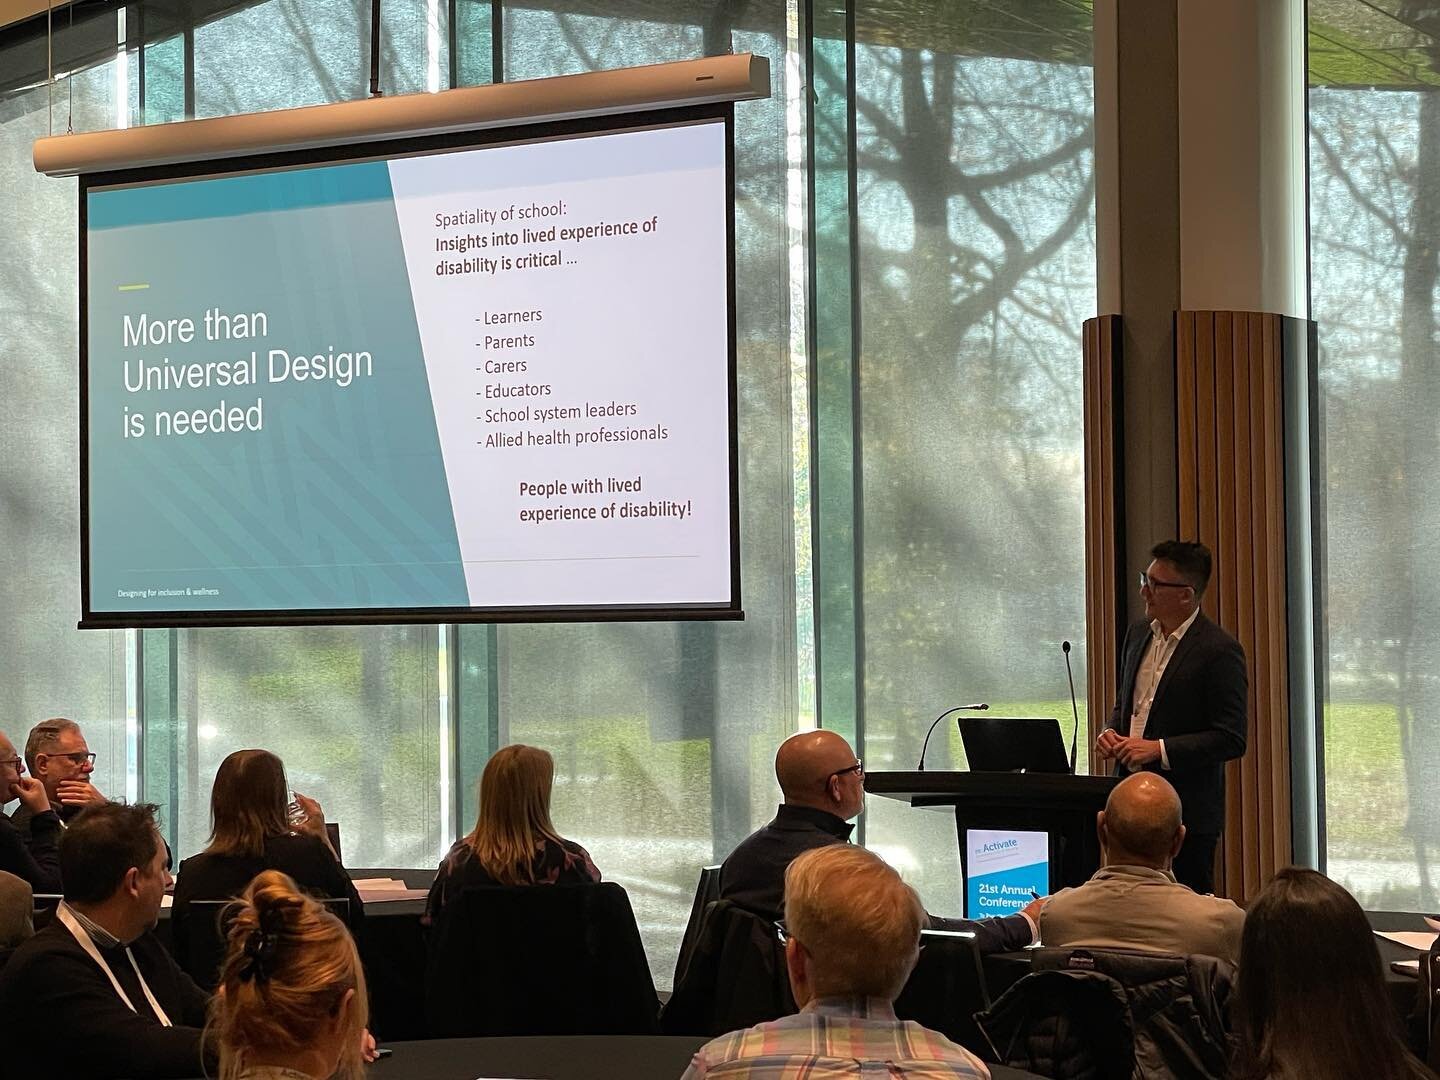 Learning about how to design for inclusion which is more layered than just universal design. Very interesting session Dr Scott, Dr Ben, Julie and Fergus. @le_aust 
.
.
#diversityindesign #schooldesign